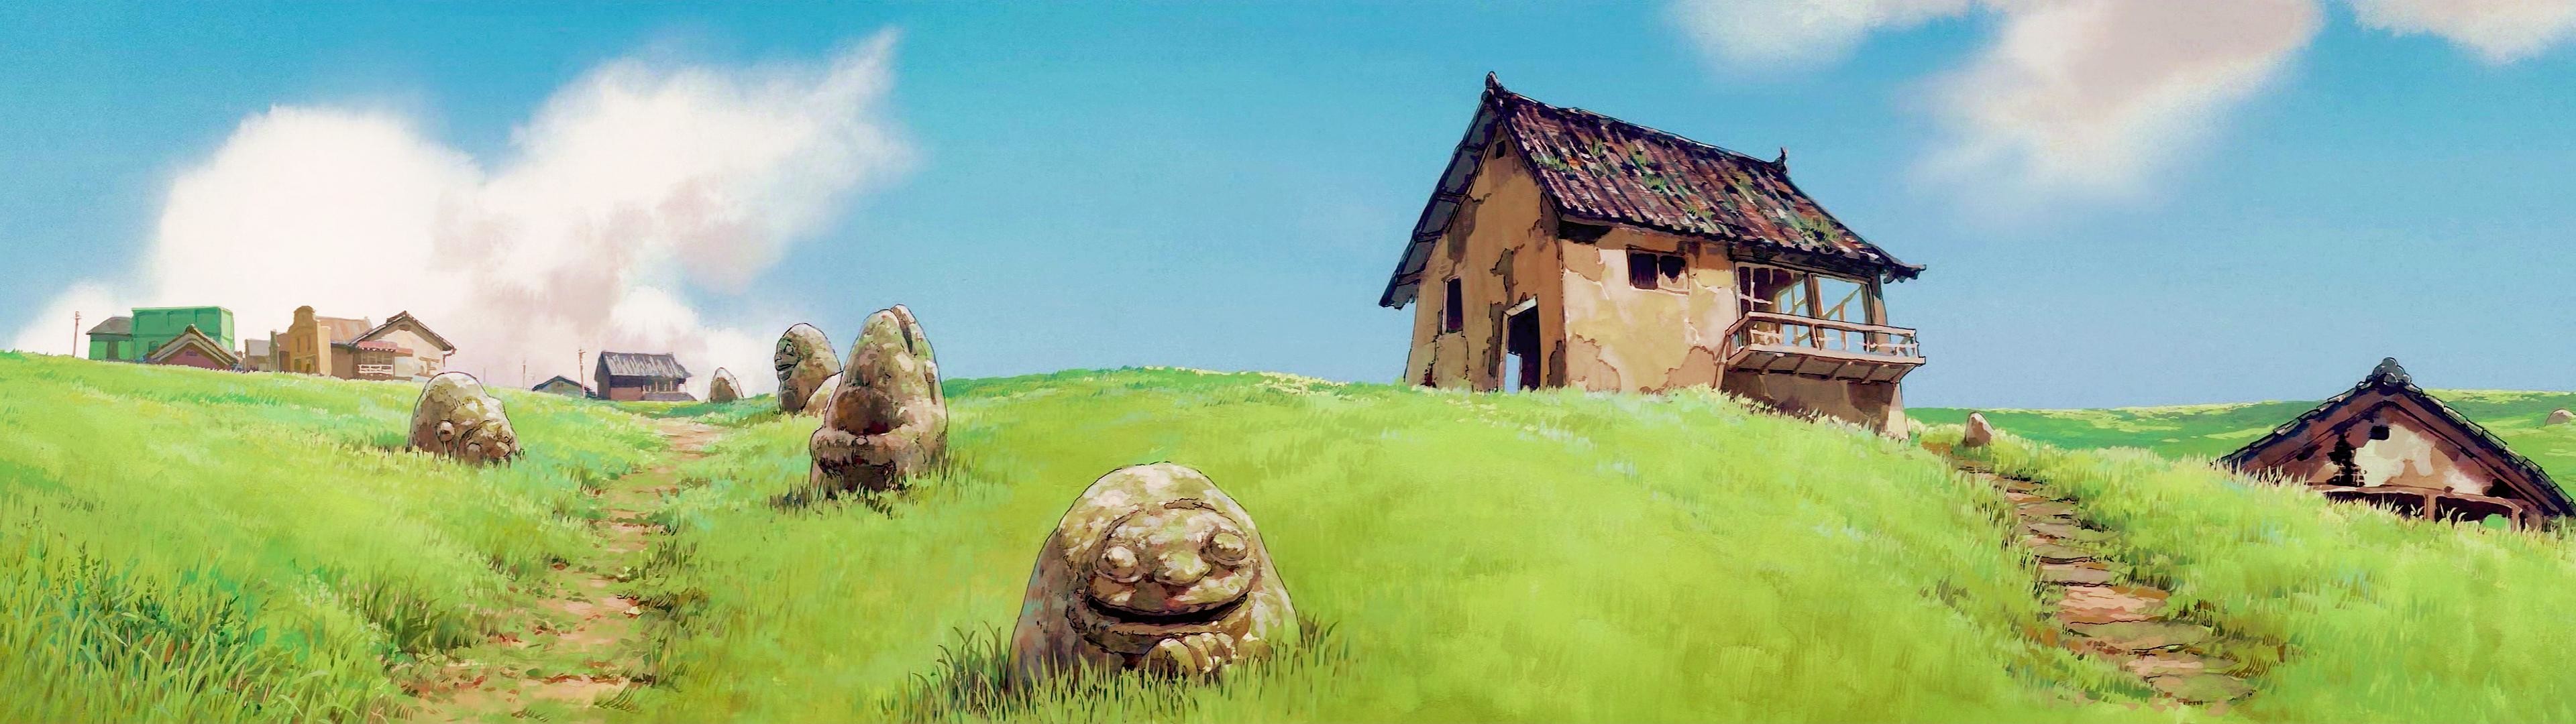 3840x1080 Reuploading the Dual Monitor Studio Ghibli Wallpapers I saw here a while  back, in case some people didn't get them.